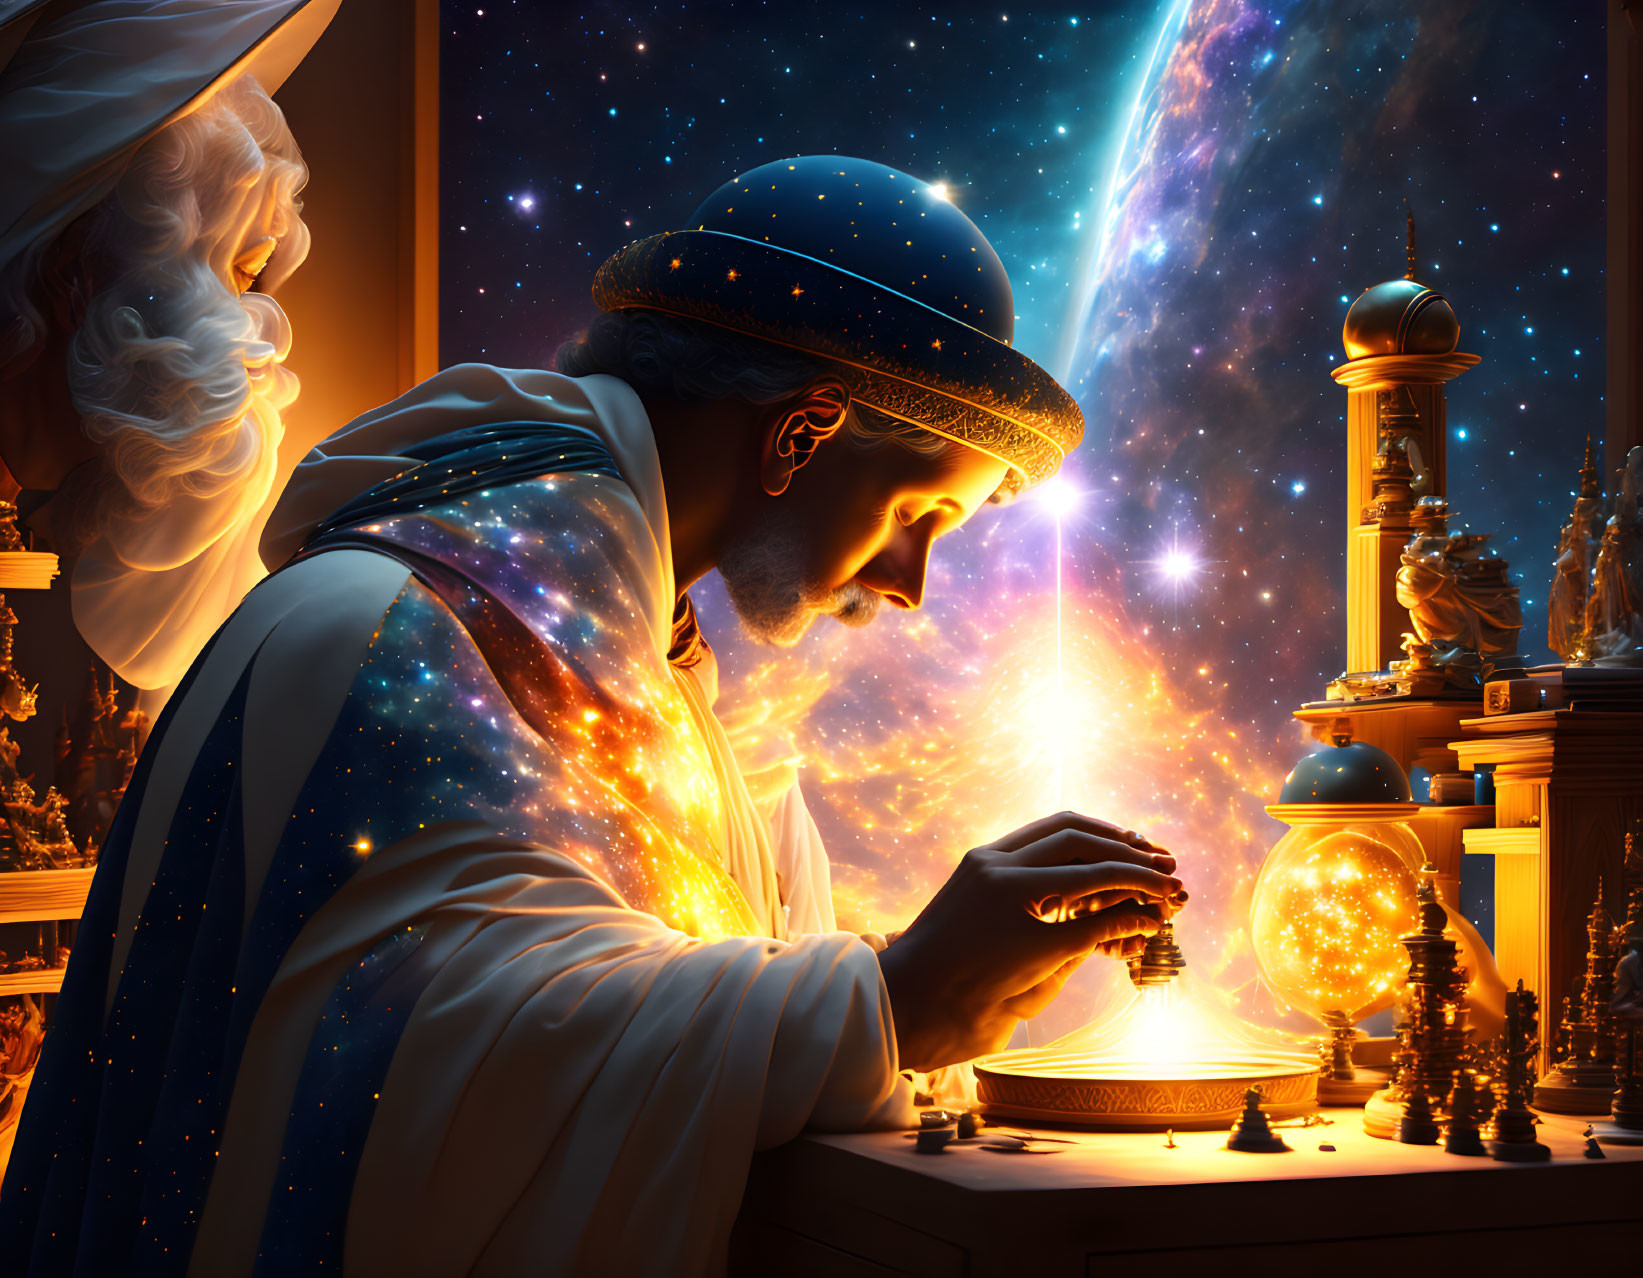 Scholar studying celestial model with galaxy backdrop and wisdom figure